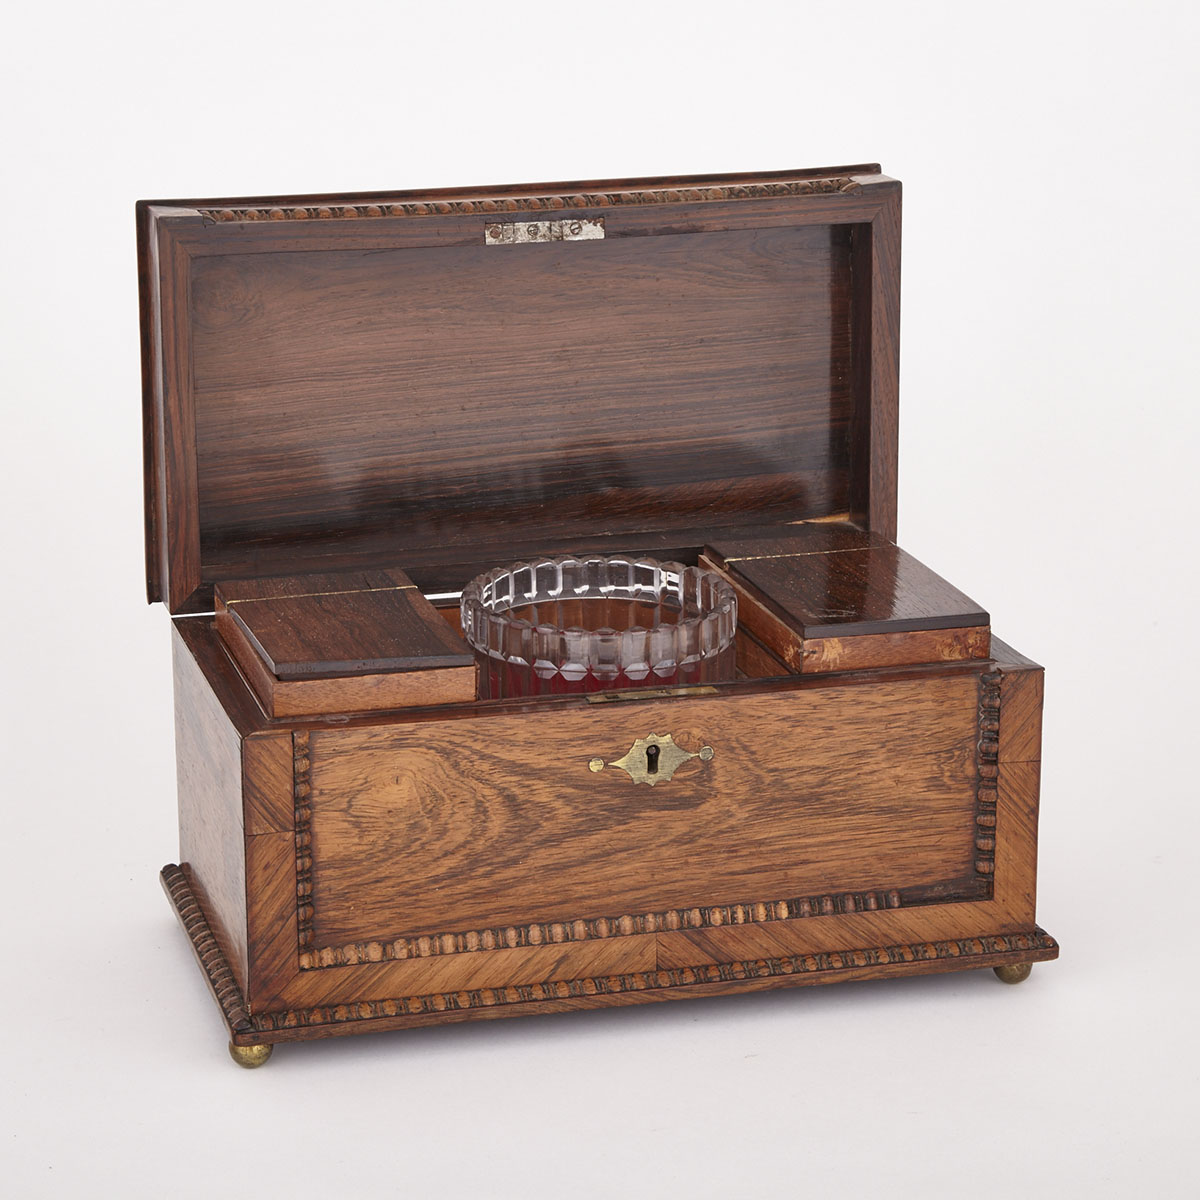 Early Victorian Rosewood Tea Caddy, c.1840